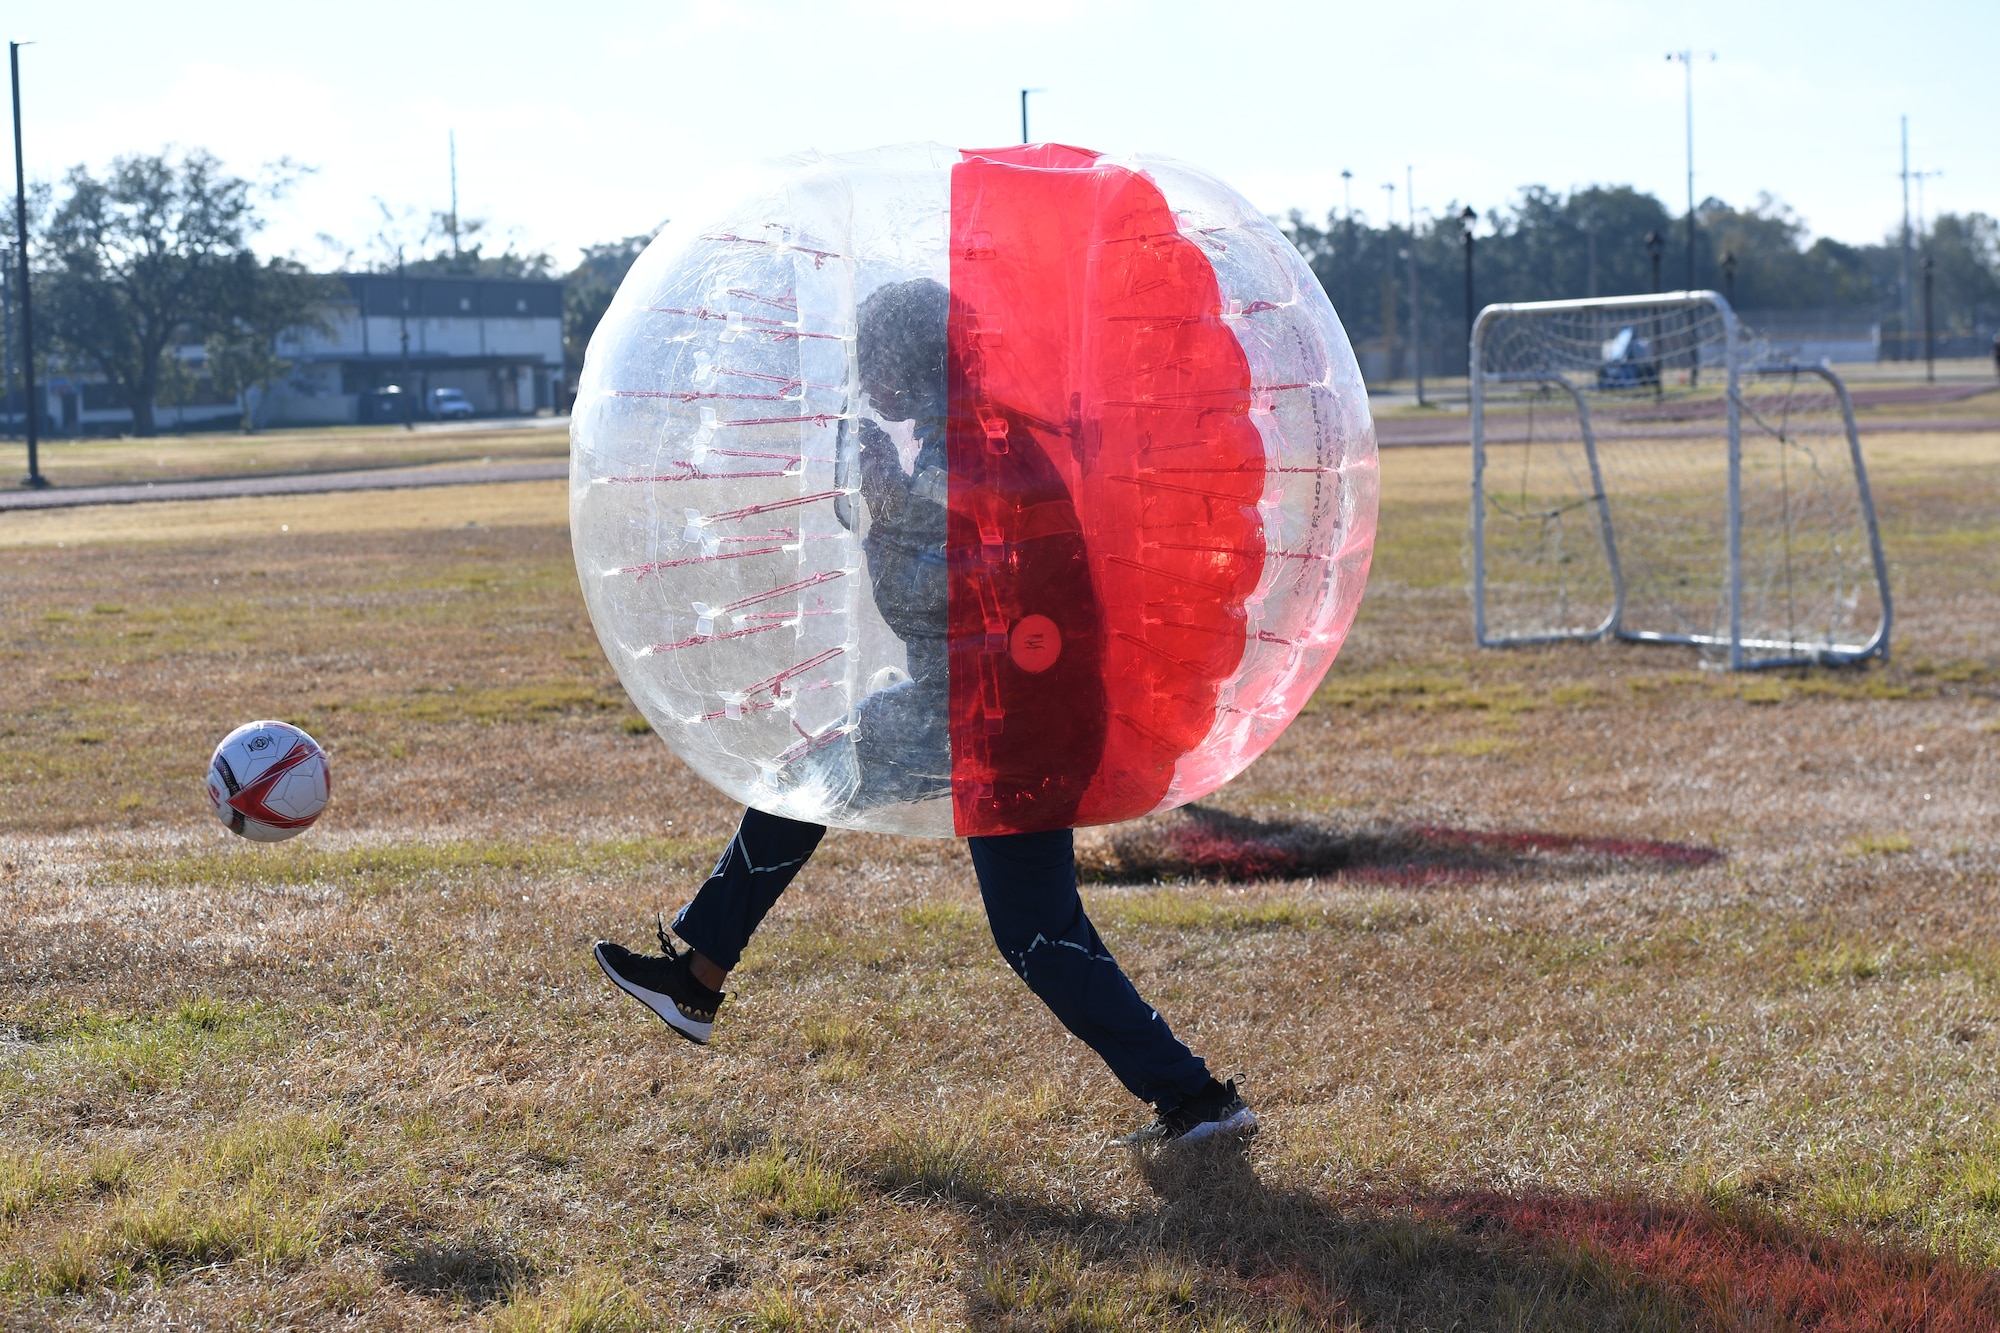 An Airman from the 81st Training Group participates in a bubble ball soccer tournament at Keesler Air Force Base, Mississippi, Dec. 21, 2020. The 81st TRG held various events for Airmen to participate in throughout the holidays, to include ice skating, inflatables, a scavenger hunt and a bubble ball soccer tournament. (U.S. Air Force photo by Kemberly Groue)